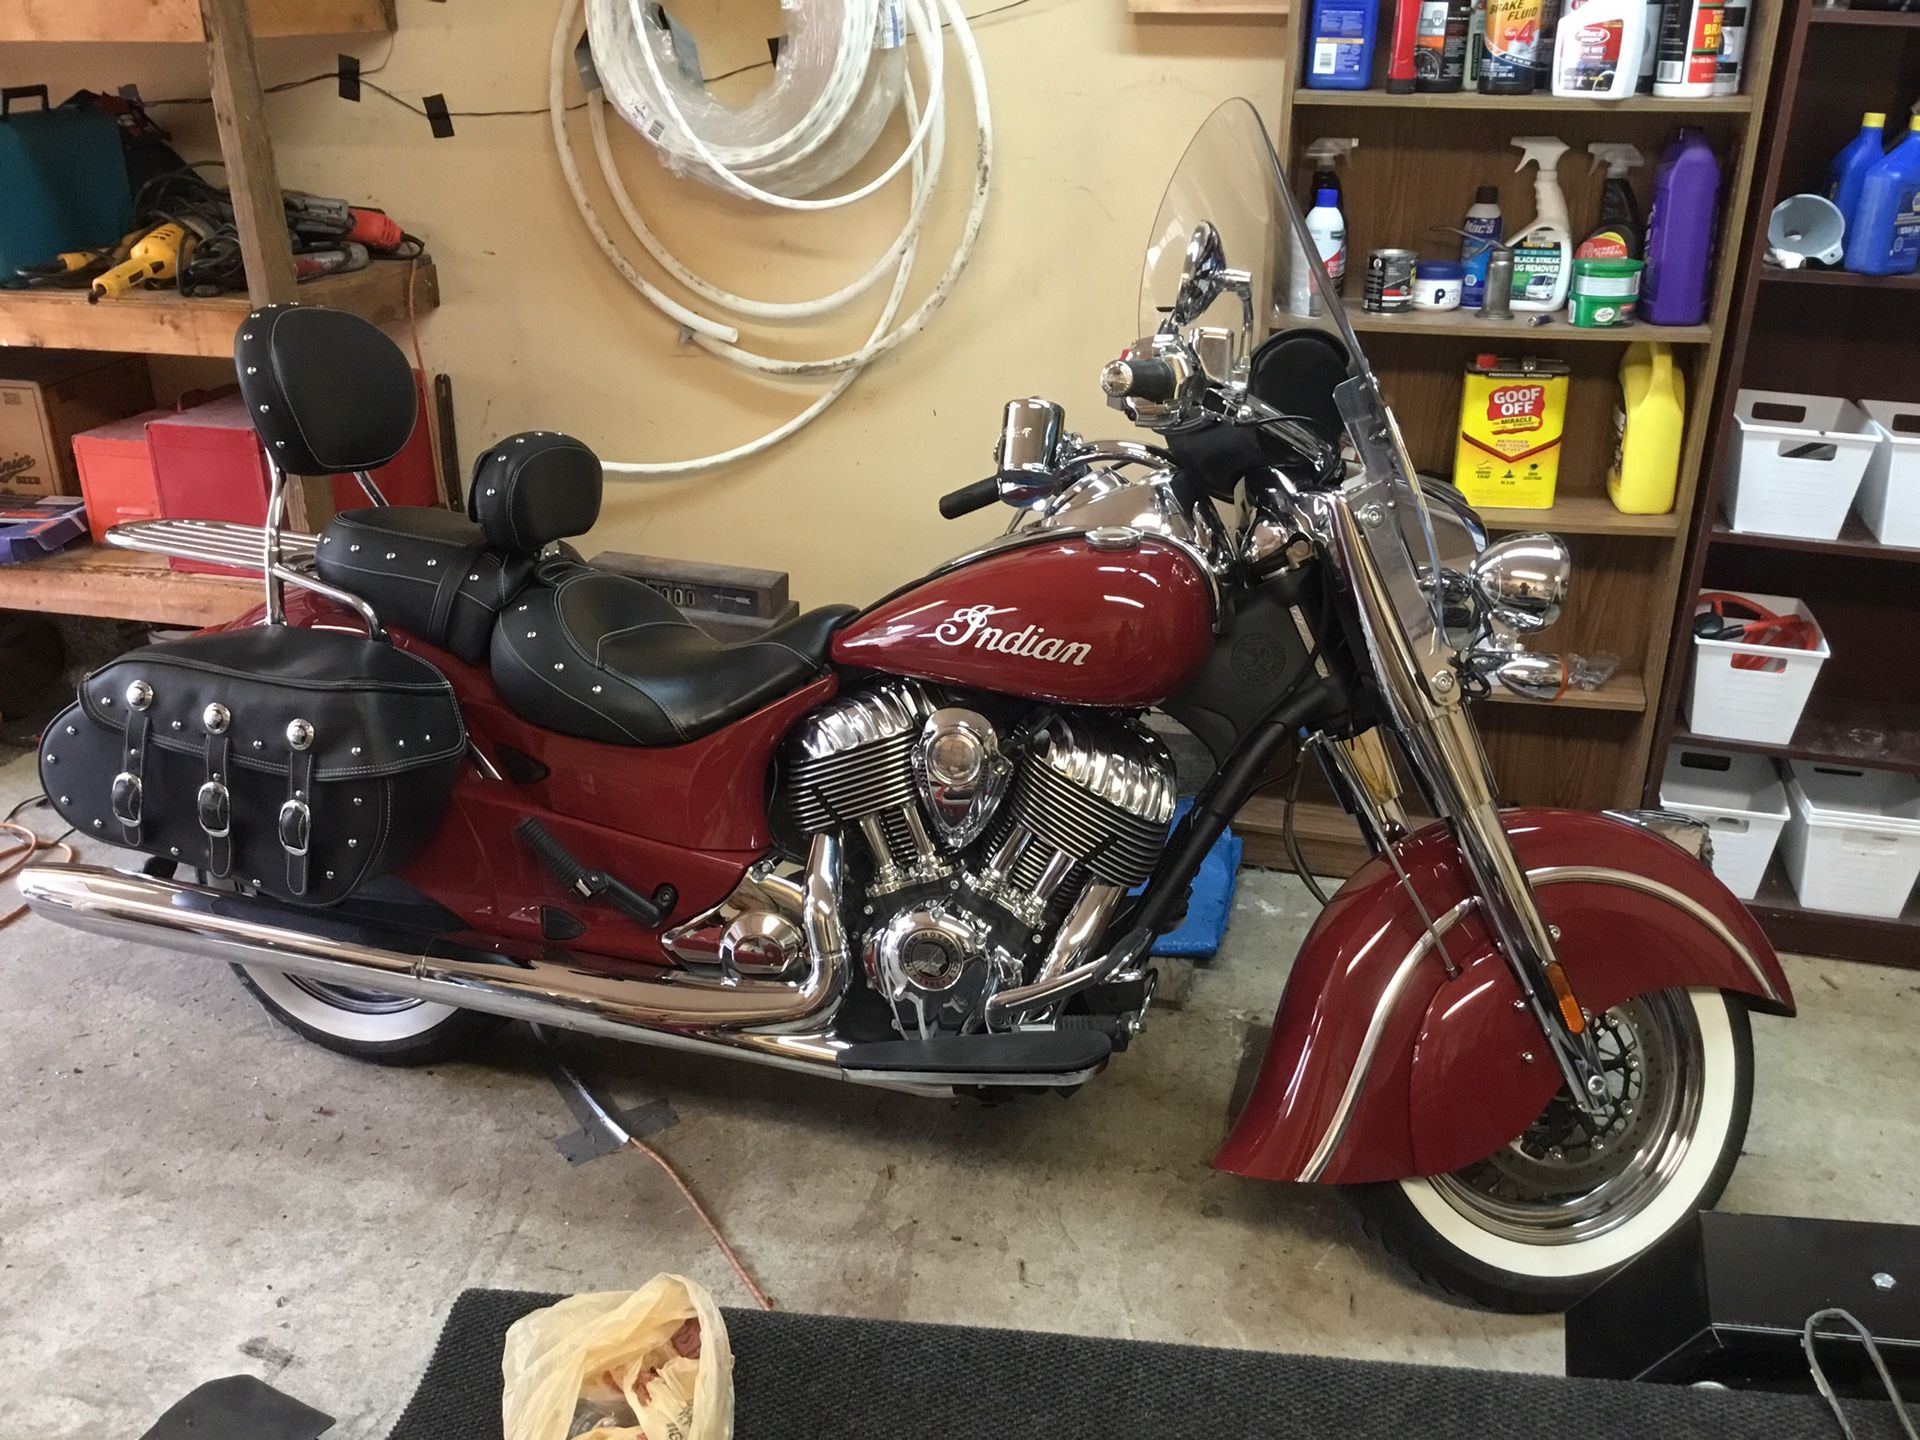 2015 Indian Vintage Chief Touring Motorcycle- clean, low miles